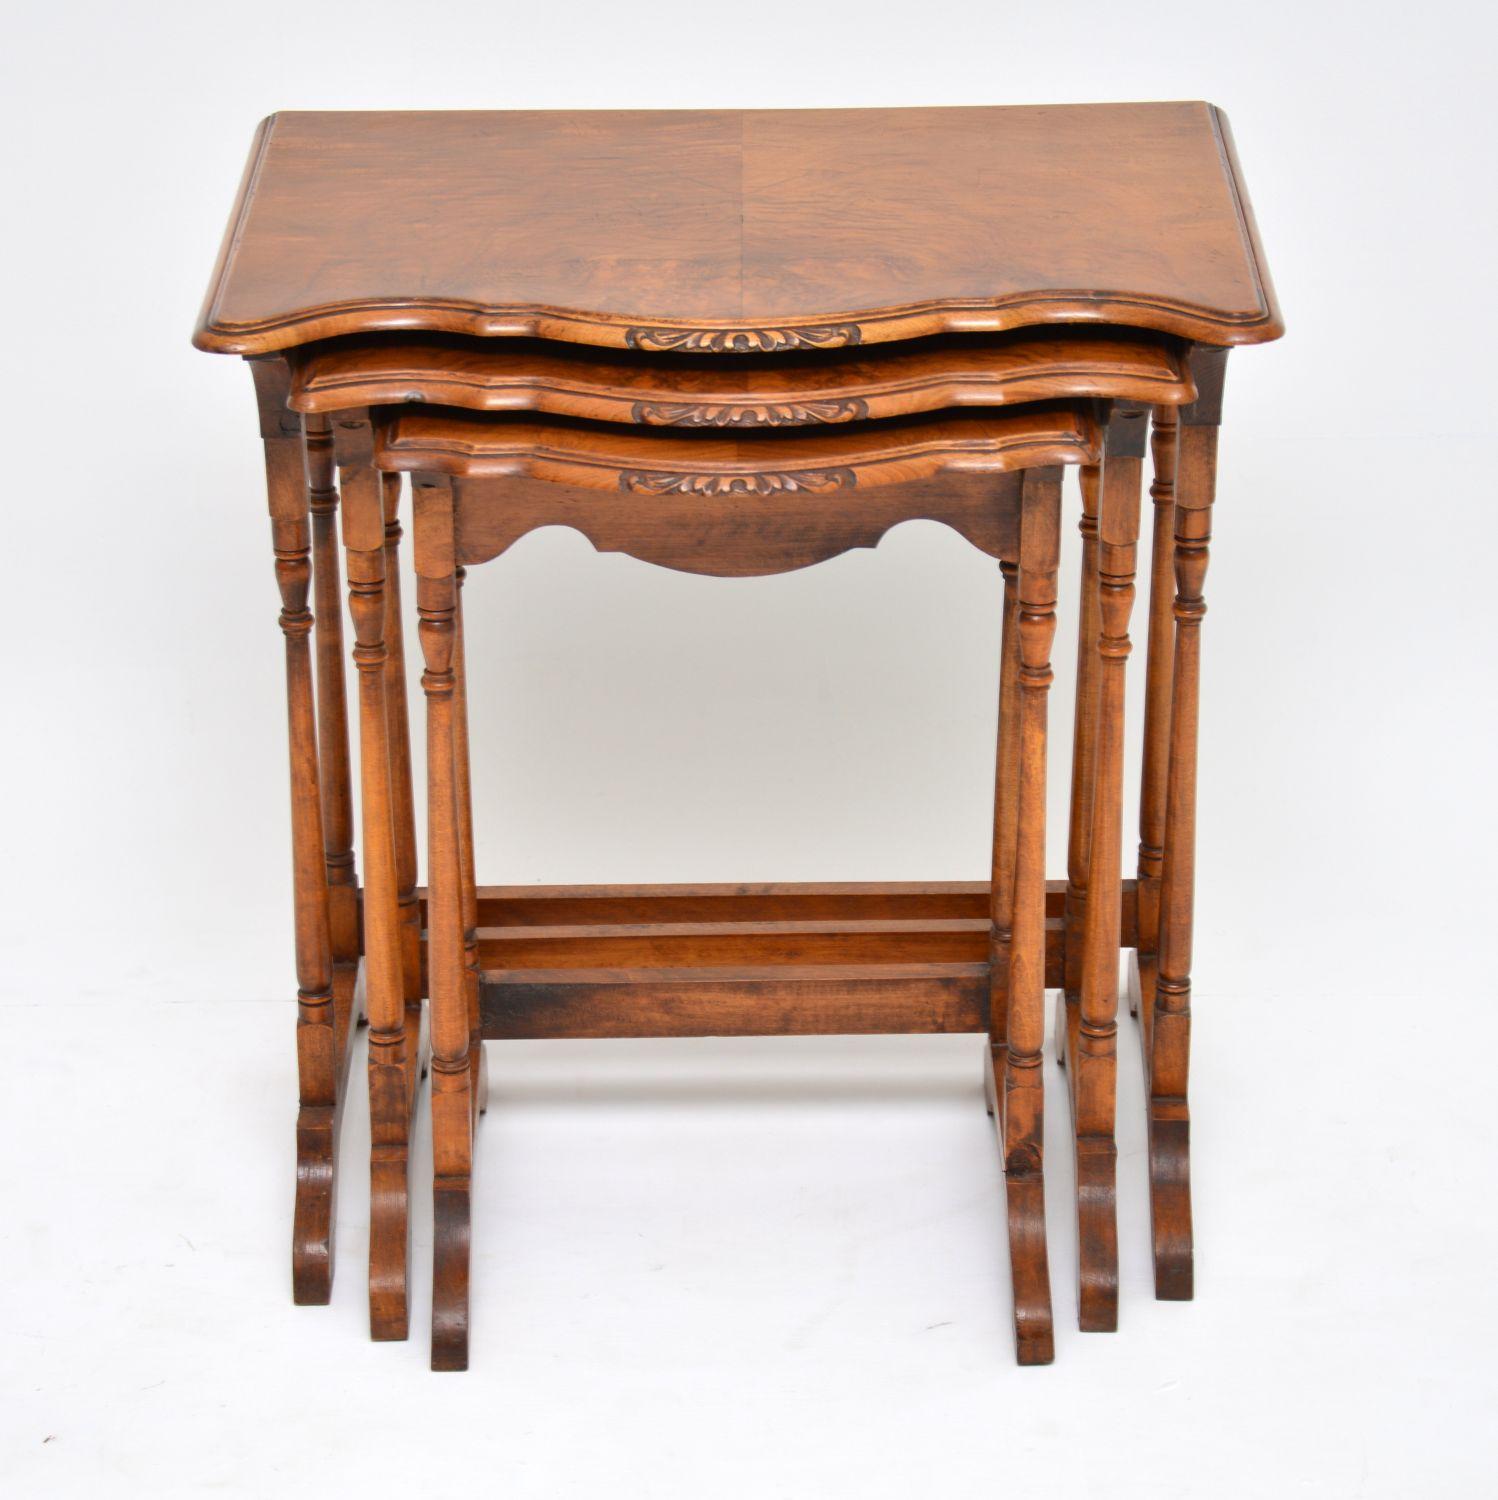 Antique walnut nest of tables dating from circa 1910s-1920s period and in excellent condition. They have burr walnut tops with well shaped fronts & Fine carving on the front edges. These tables have stretchers running between the back legs which all